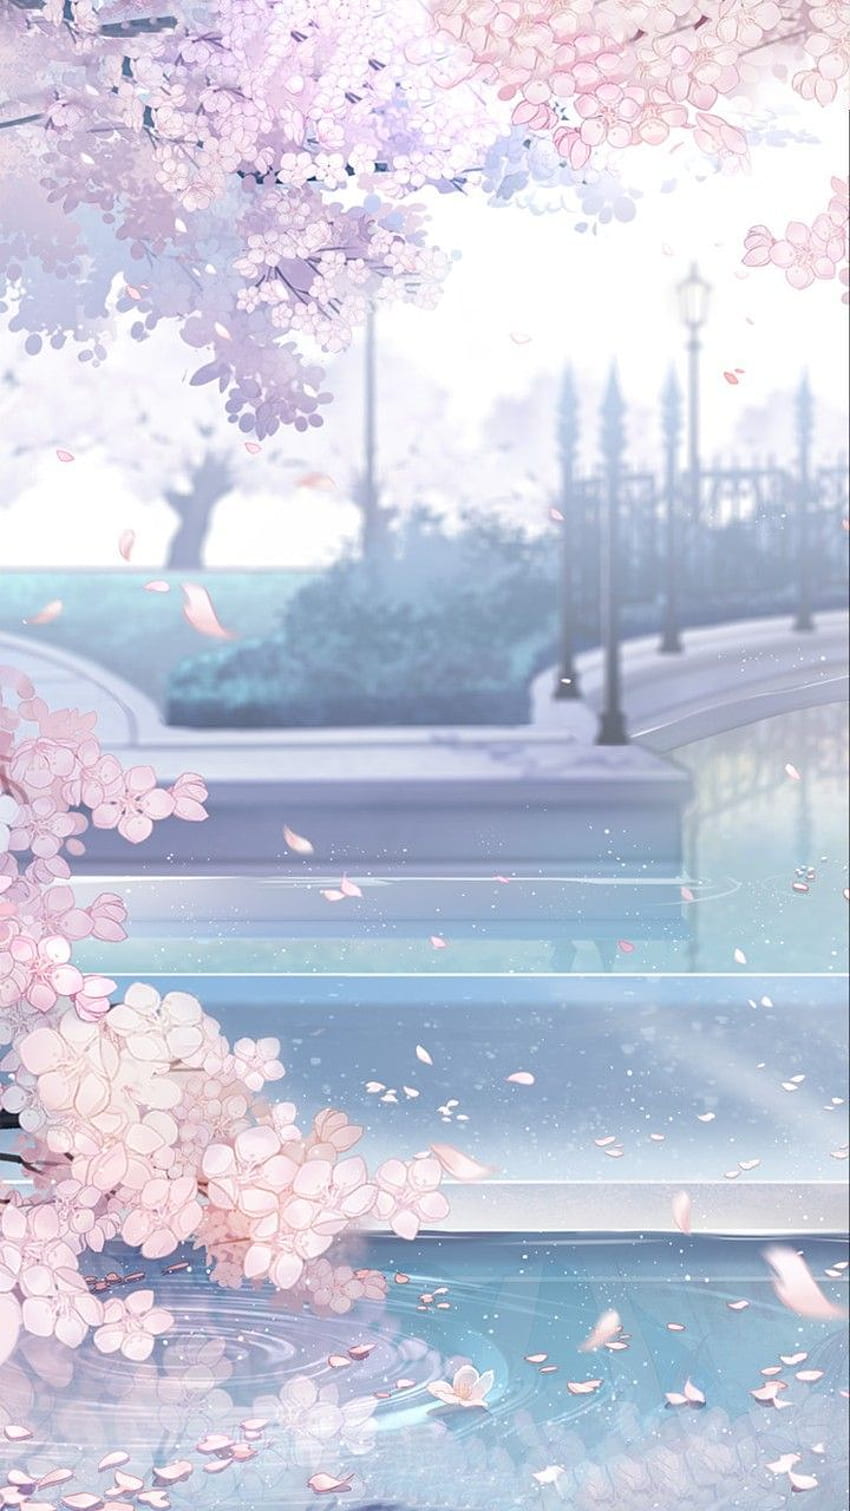 IPhone wallpaper with cherry blossoms falling into a river - Cherry blossom